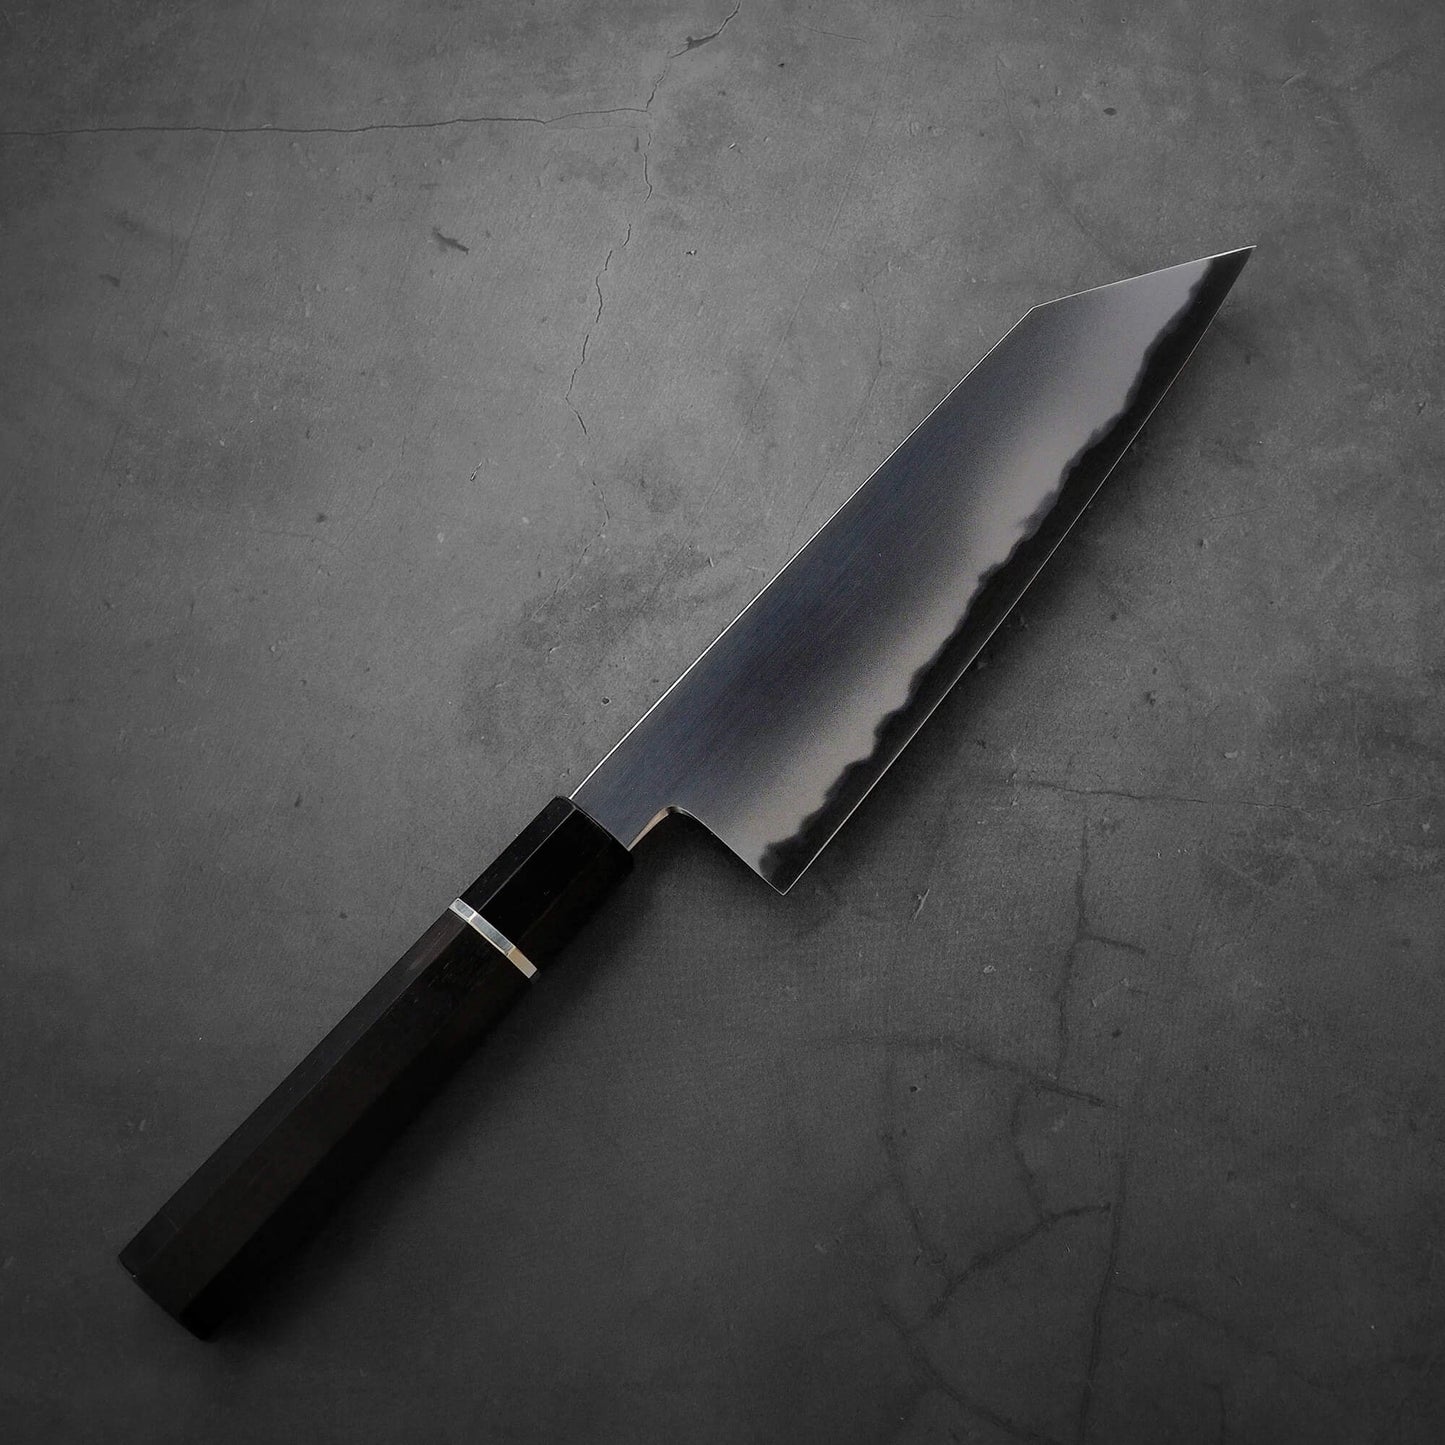 Top down view of Yoshikazu Tanaka AS bunka. This hand-forged Japanese knife is made of aogami super steel.